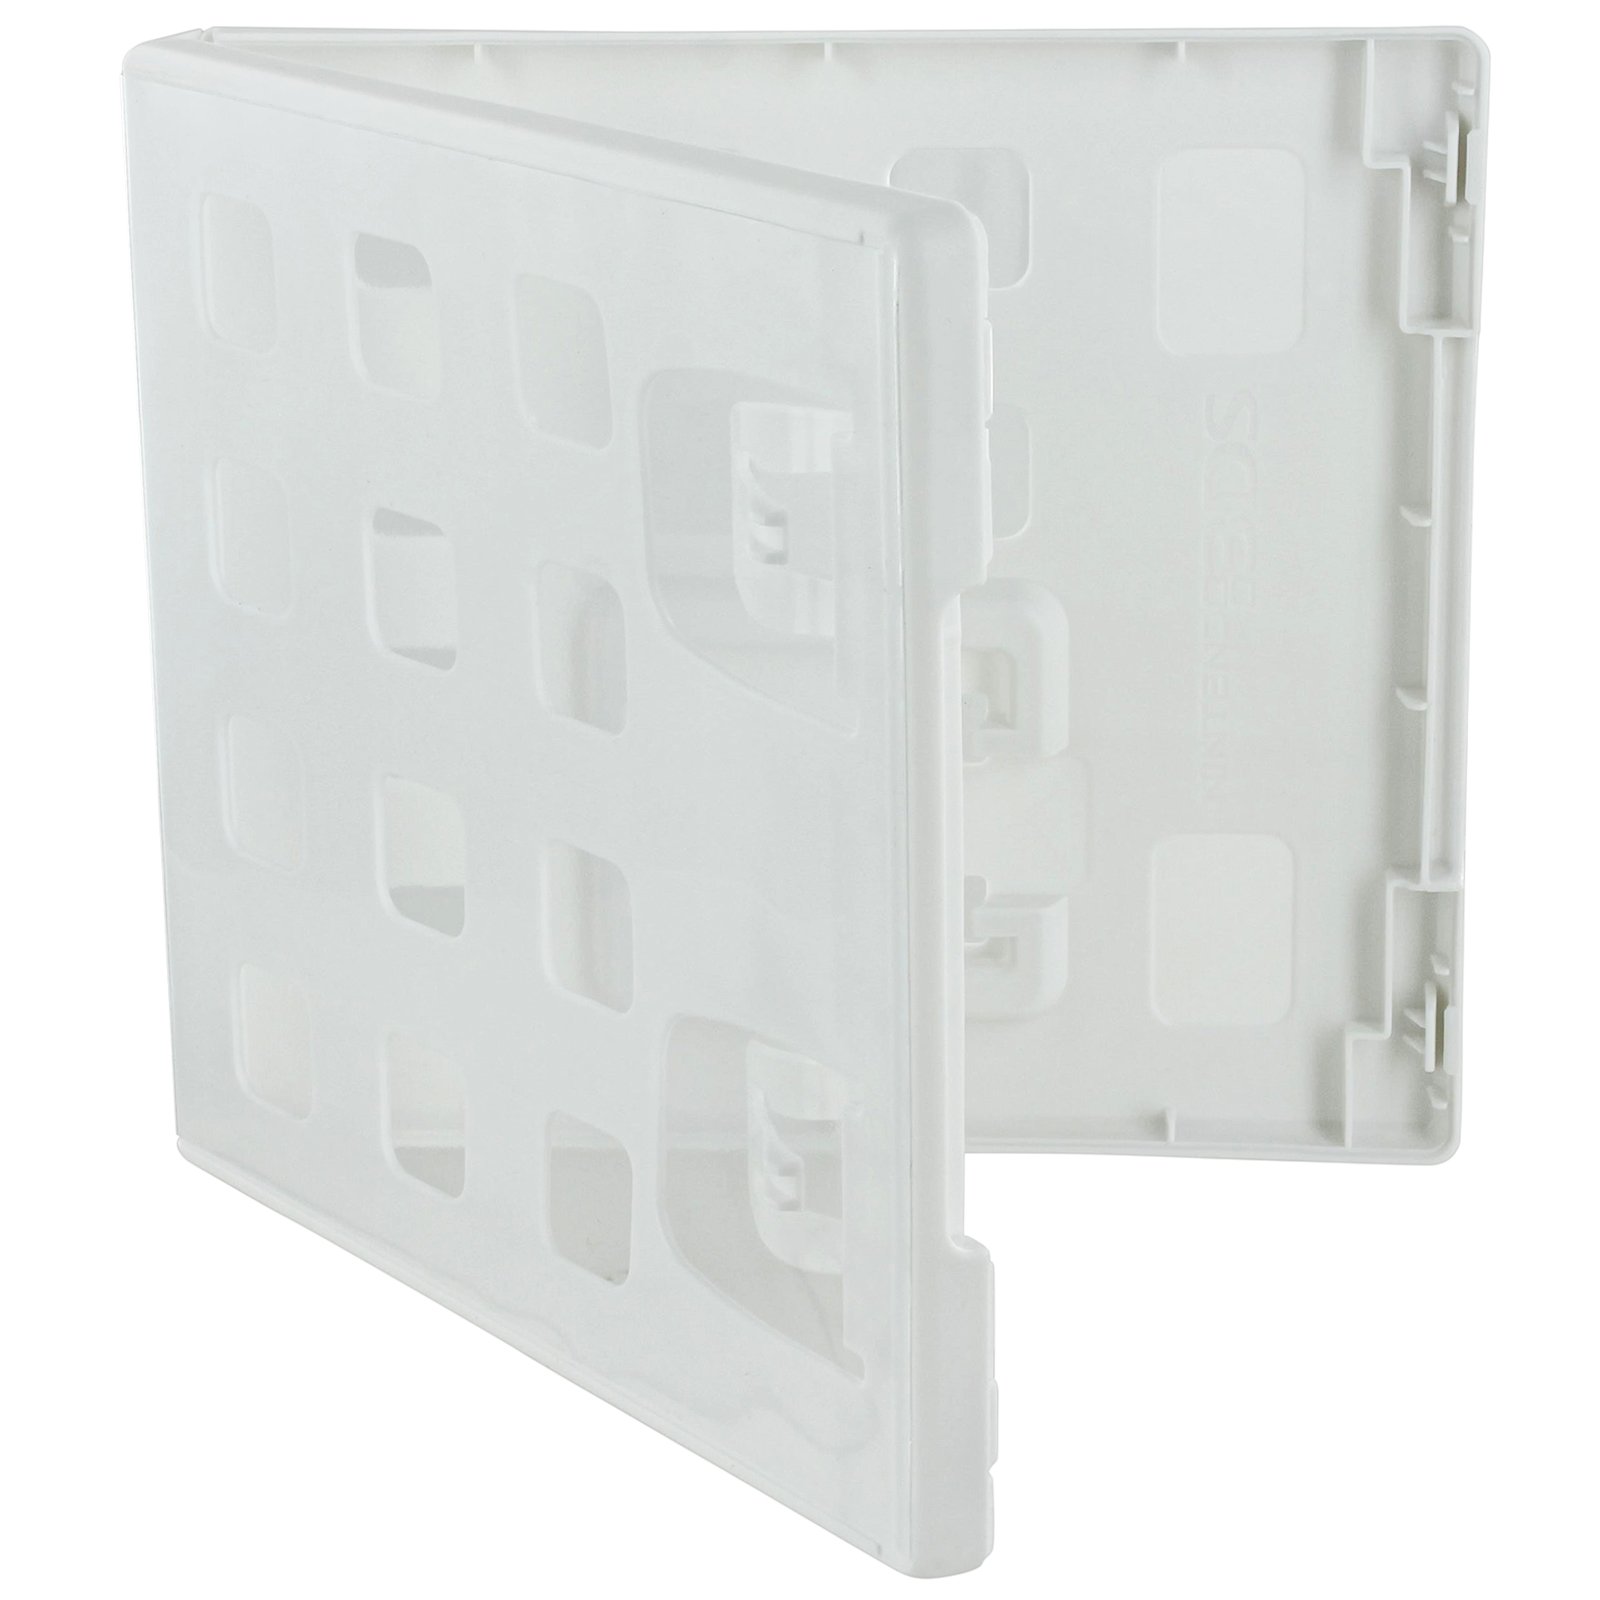 Køb Official replacement Nintendo 3DS retail game cartridge case 2 pack white